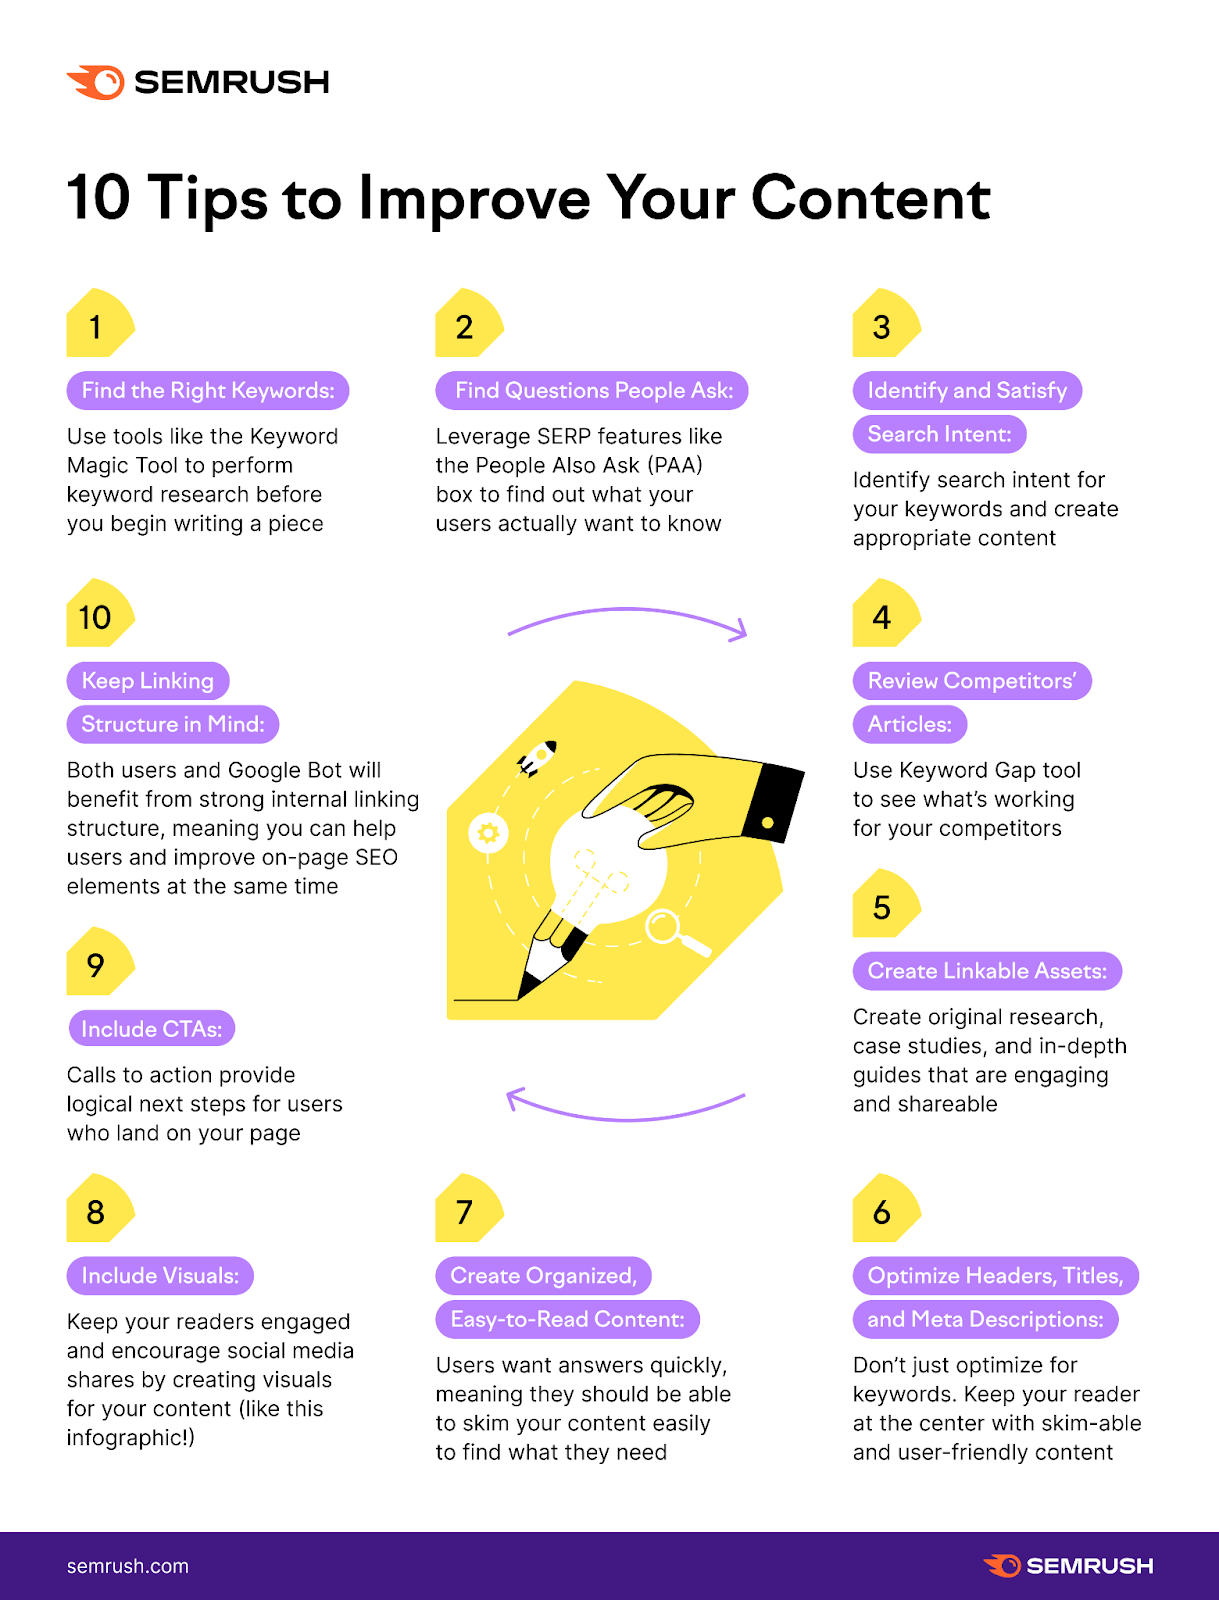 Semrush's infographic giving 10 tips to improve your content